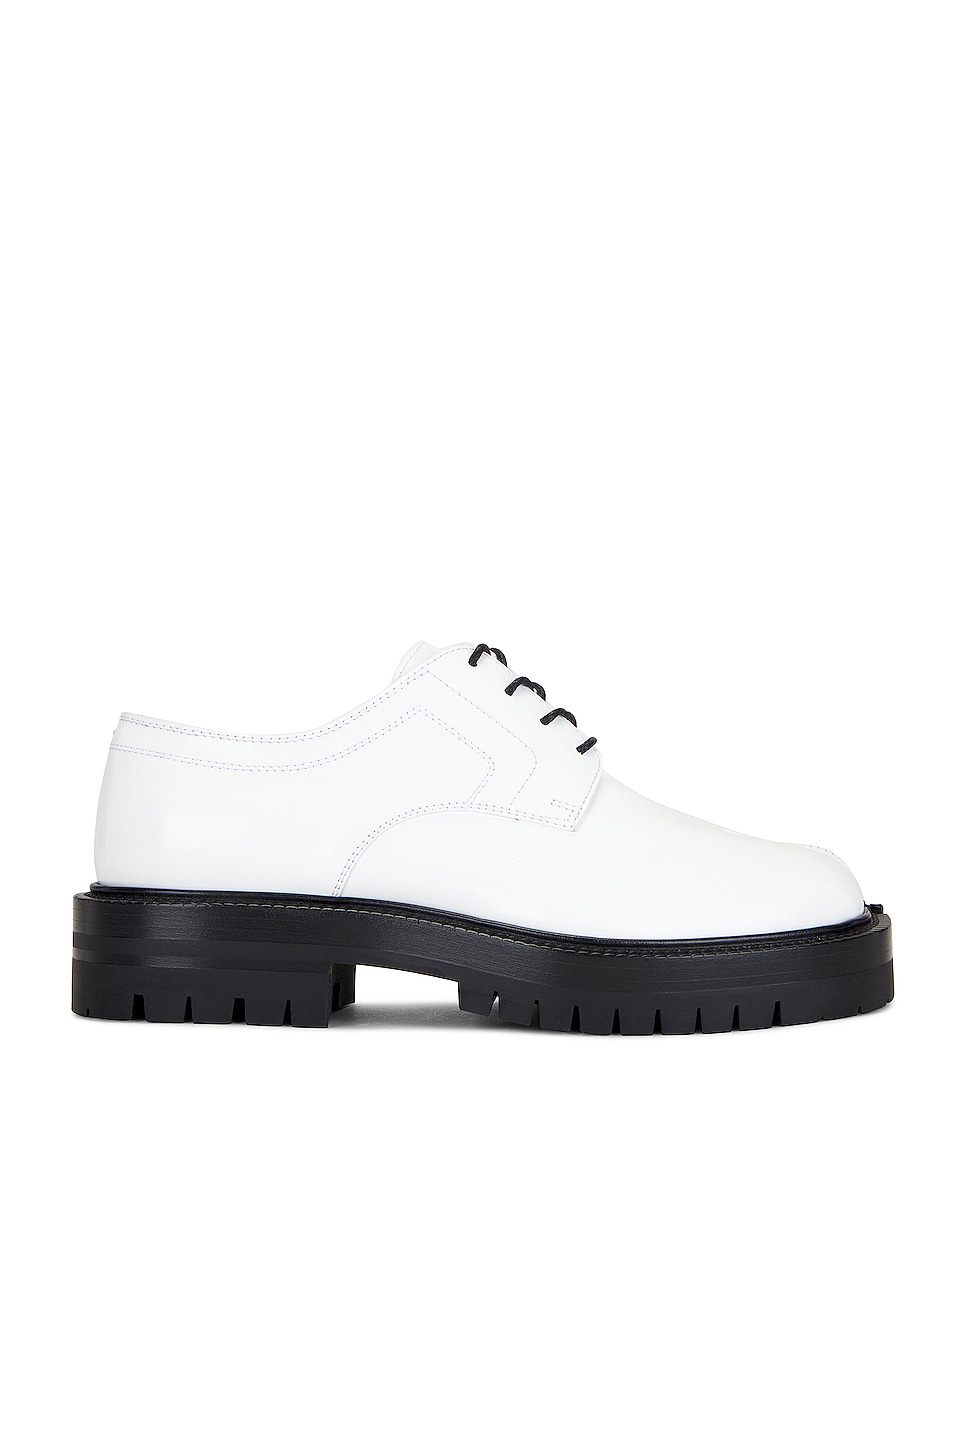 Image 1 of Maison Margiela Tabi Country Derby Lace-up in White & Black